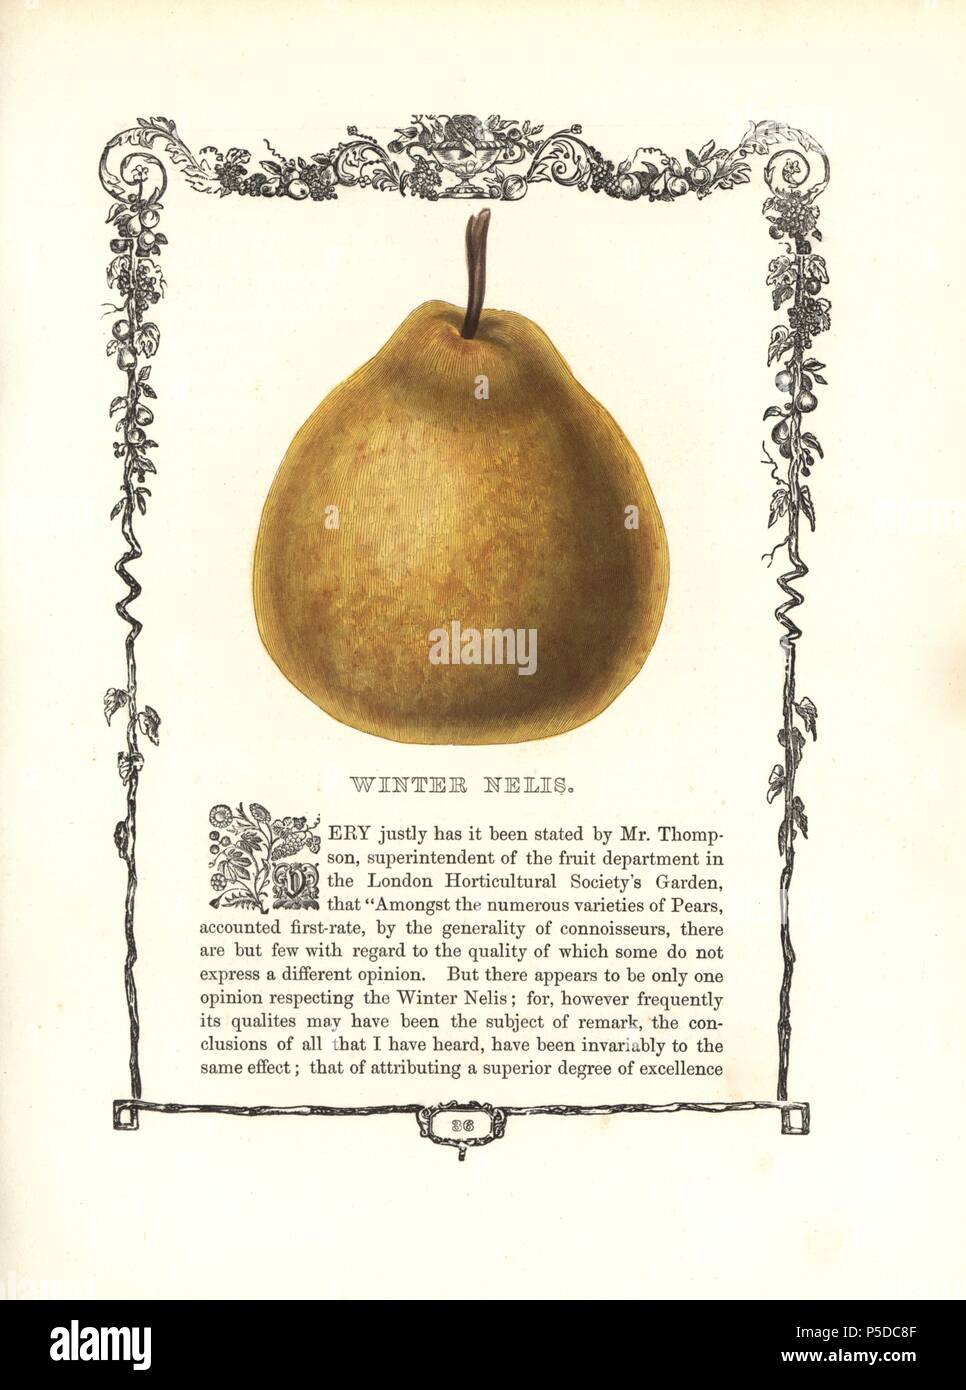 Winter Nelis pear, Pyrus communis, within a Della Robbia ornamental frame with text below. Handcoloured glyphograph from Benjamin Maund's 'The Fruitist,' London, 1850, Groombridge and Sons. Maund (1790–1863) was a pharmacist, botanist, printer, bookseller and publisher of 'The Botanic Garden' and 'The Botanist.'. Stock Photo